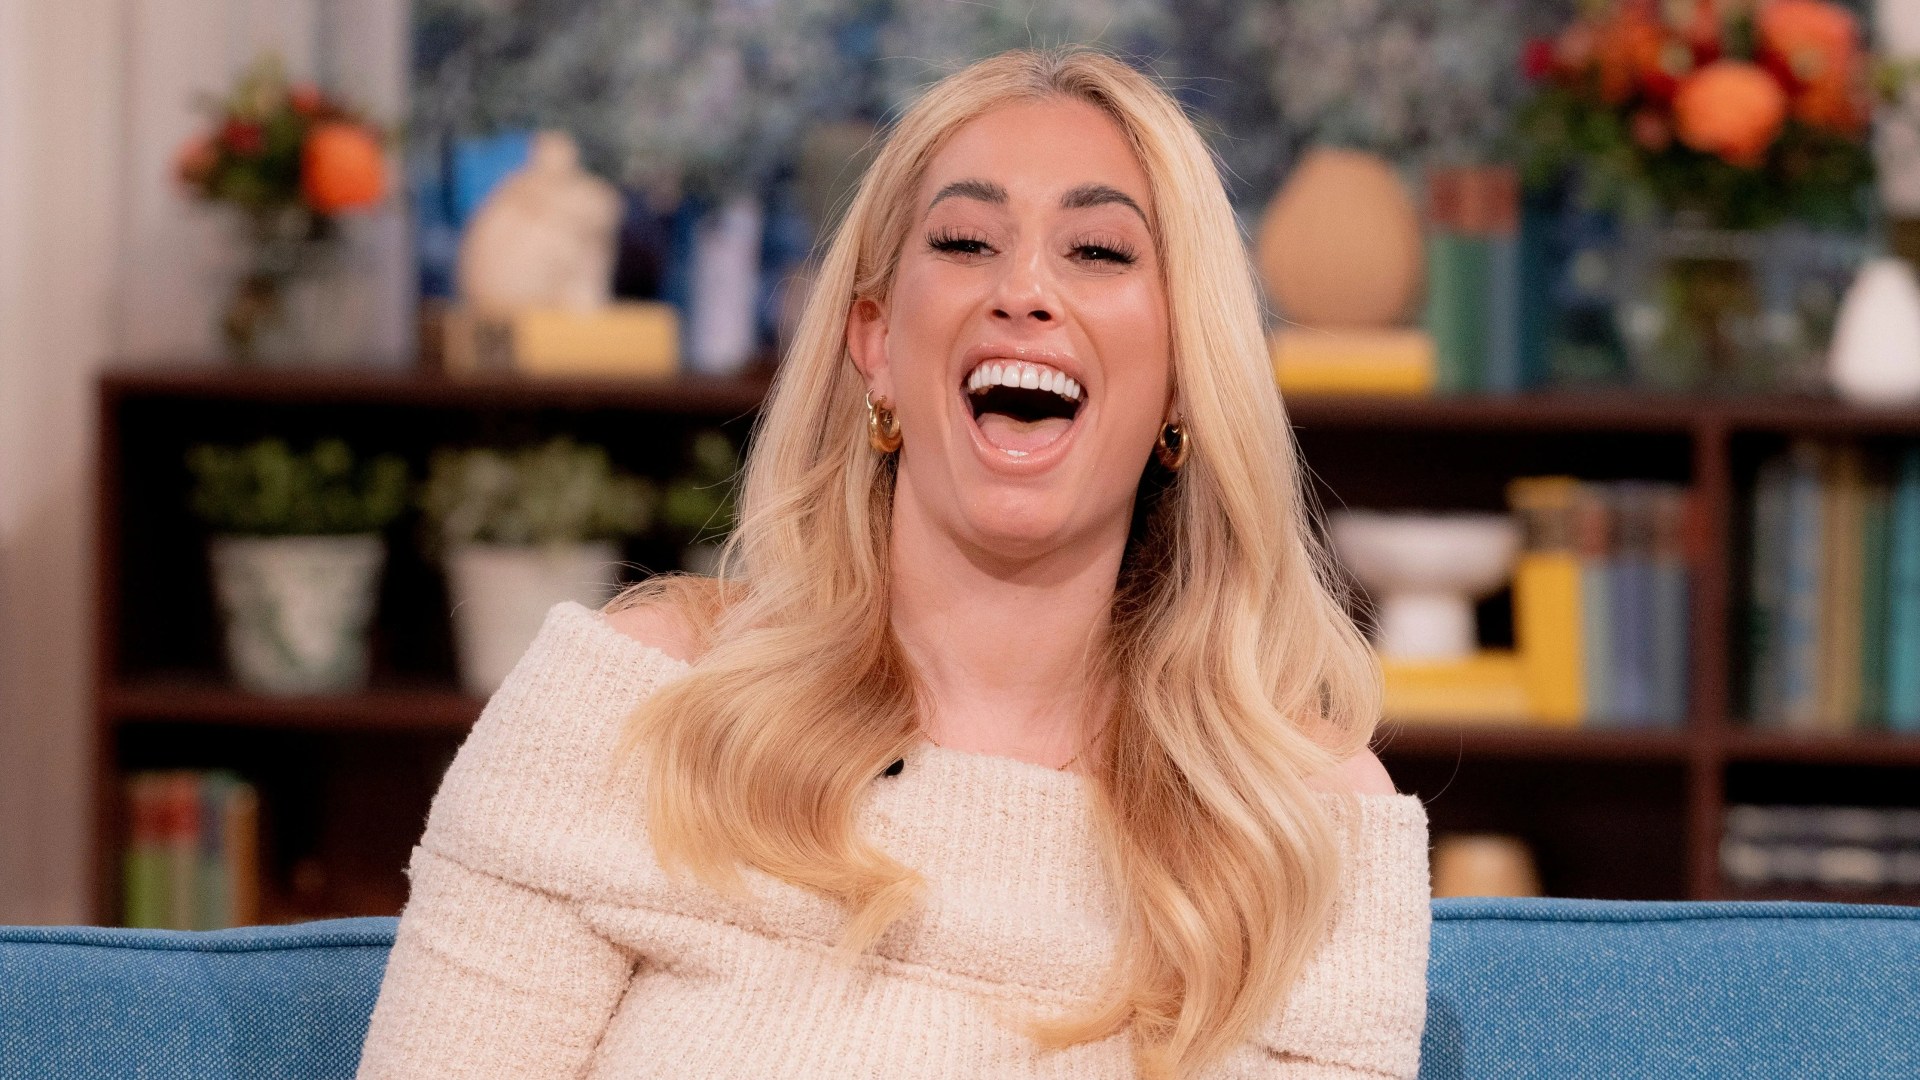 How Stacey Solomon is set to make 1.5 MILLION flogging beauty products as she goes solo and launches her own company [Video]